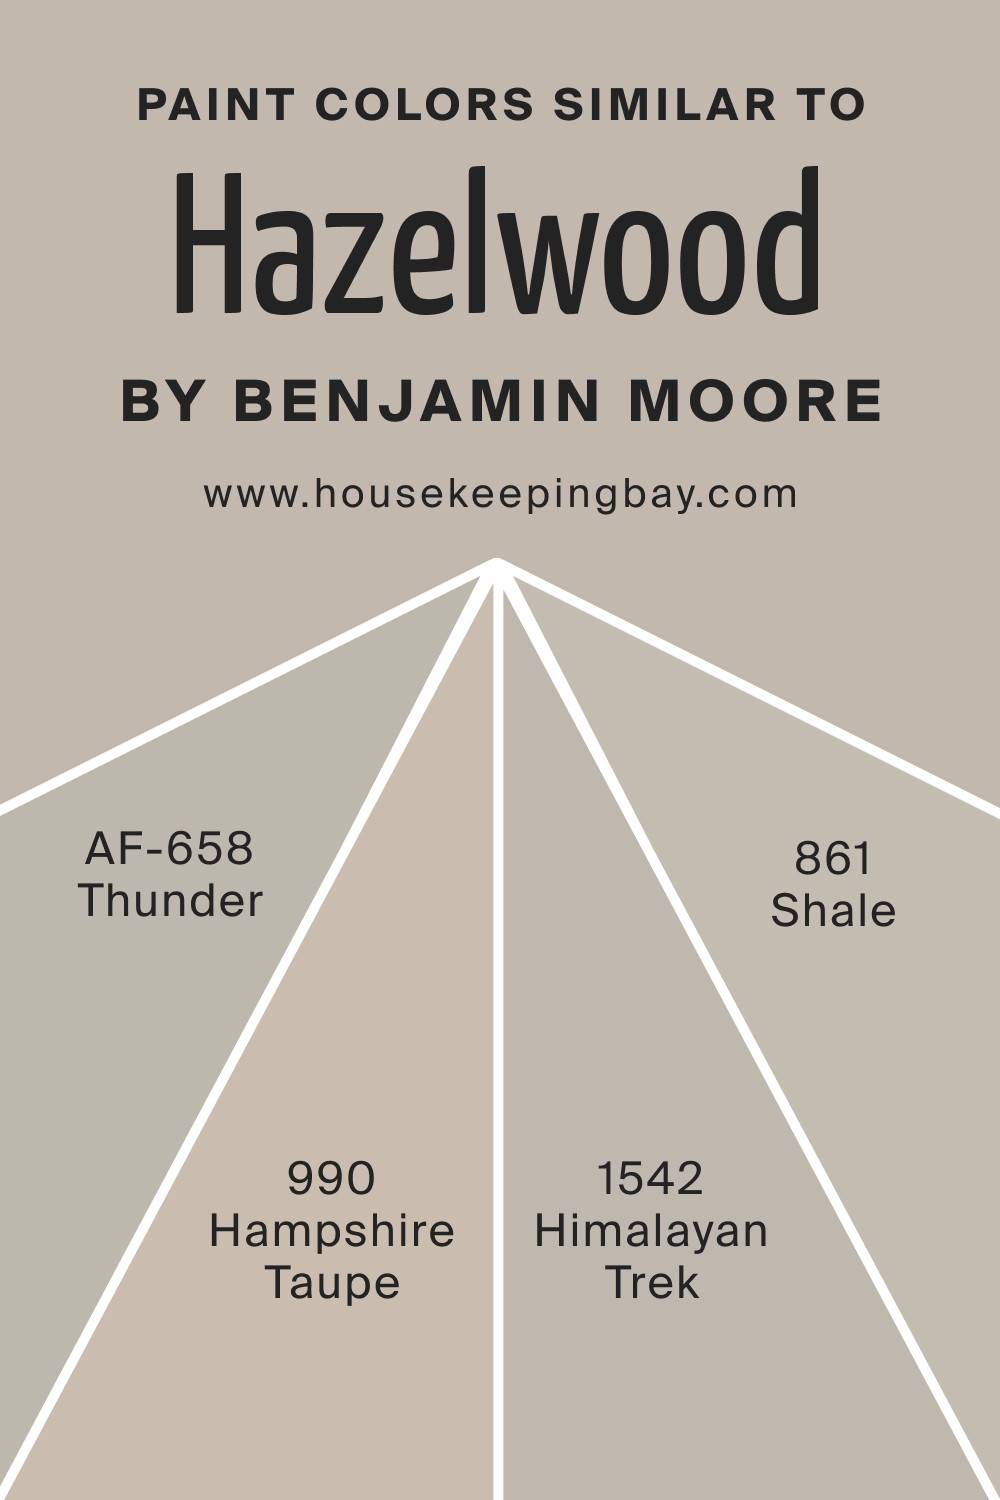 Paint Colors Similar to BM Hazelwood 1005 by Benjamin Moore